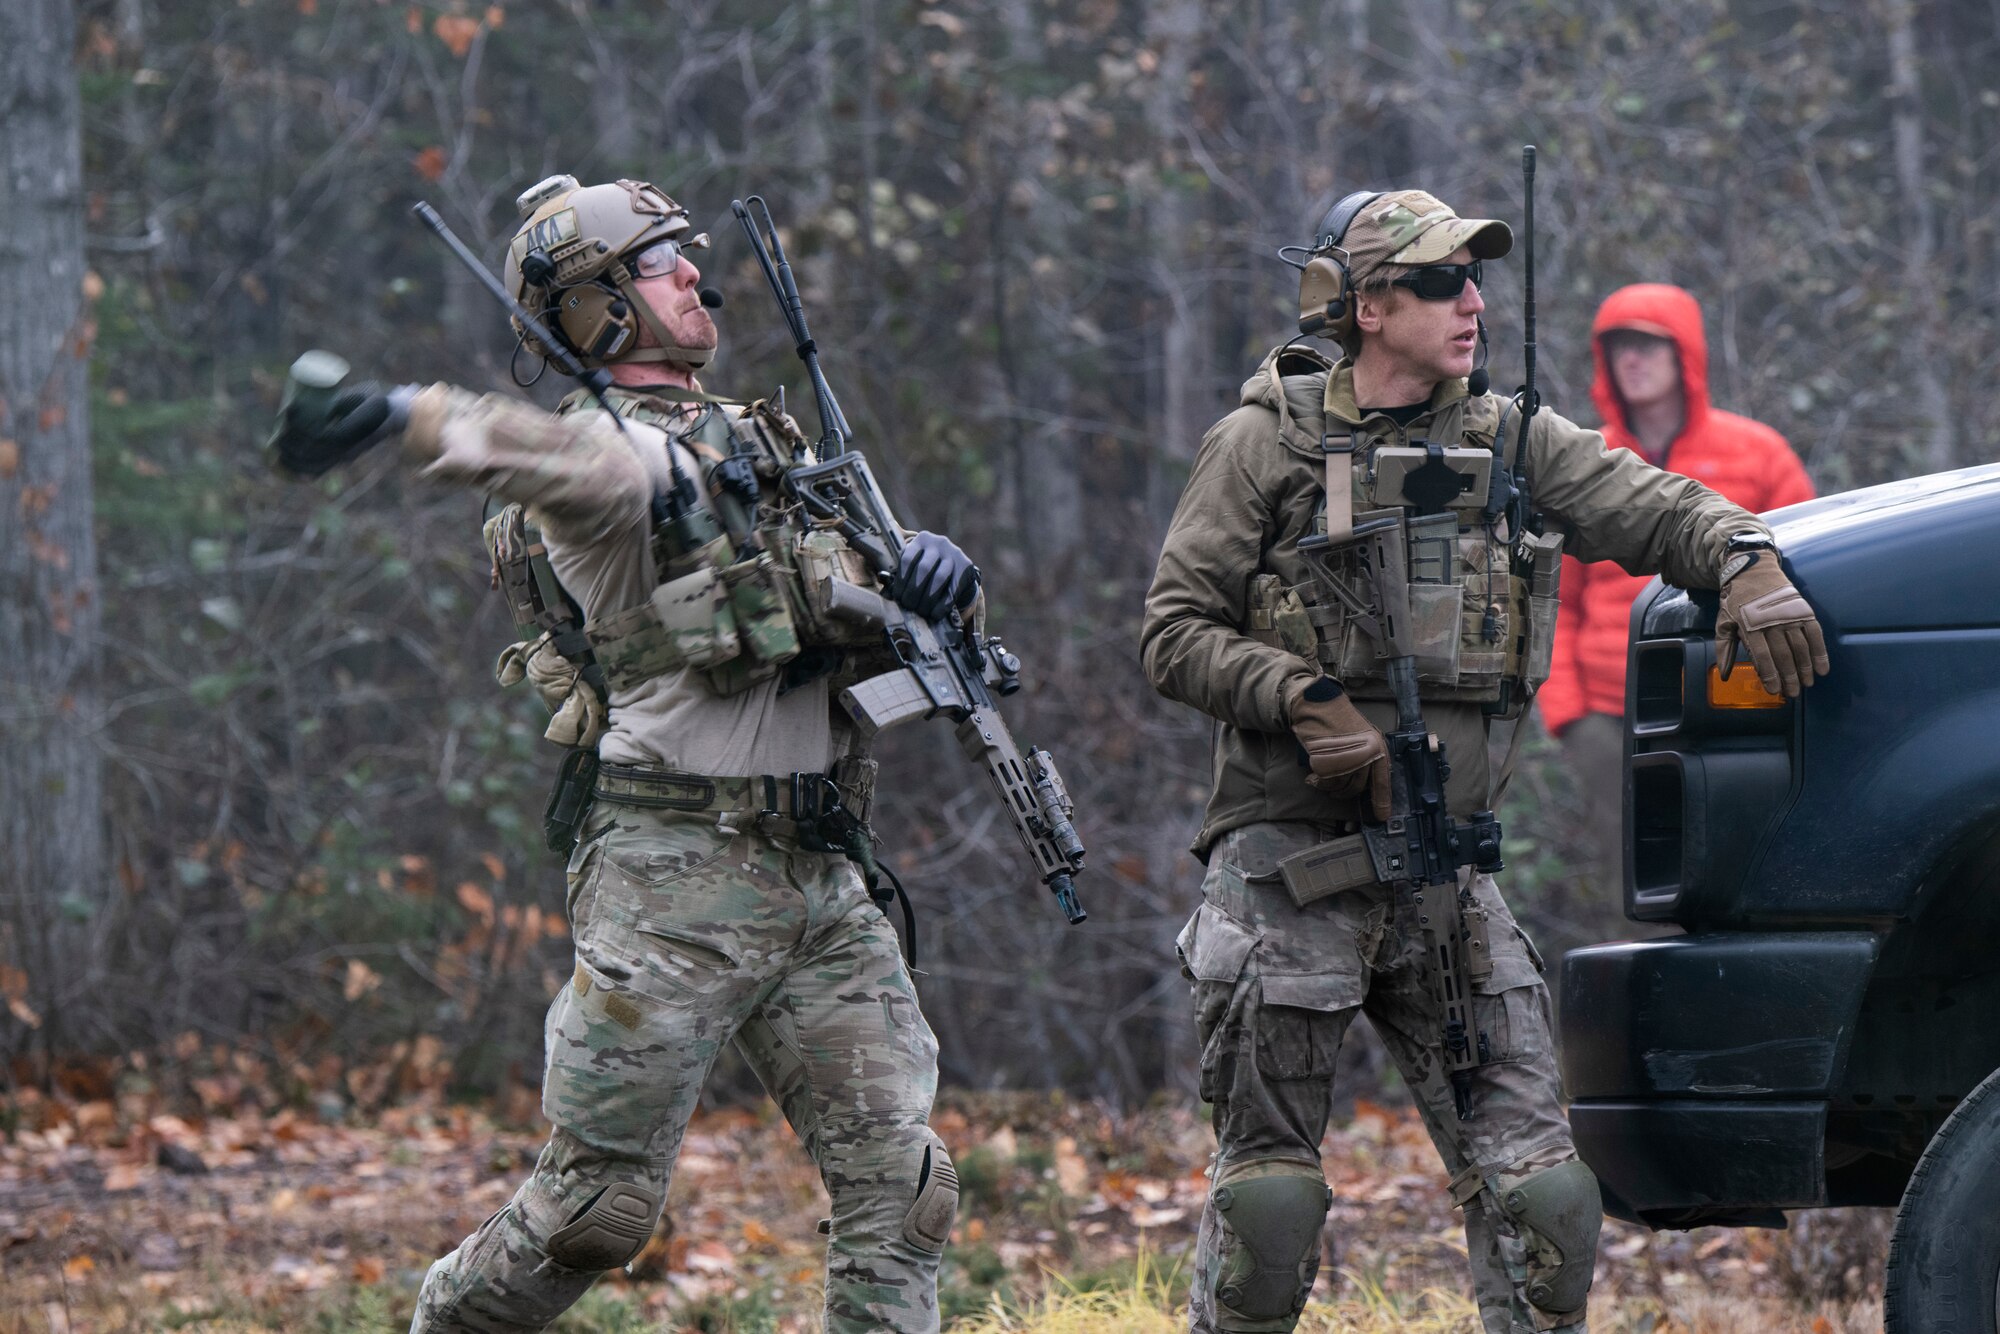 Arctic Guardian PJs partner with Army Guard for mass casualty exercise